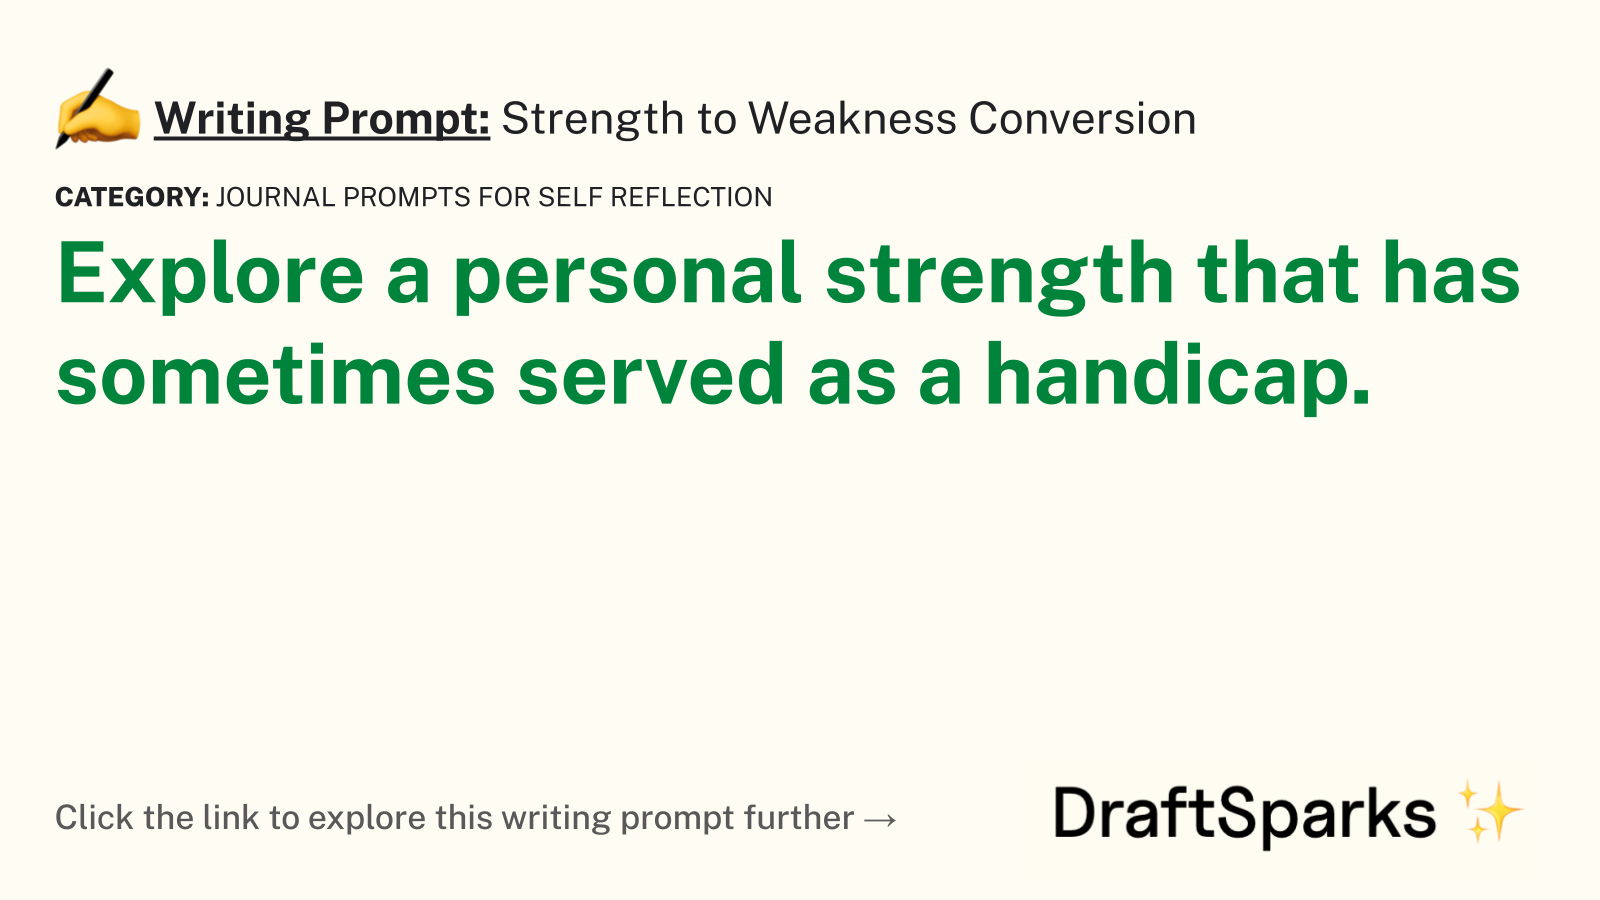 Strength to Weakness Conversion